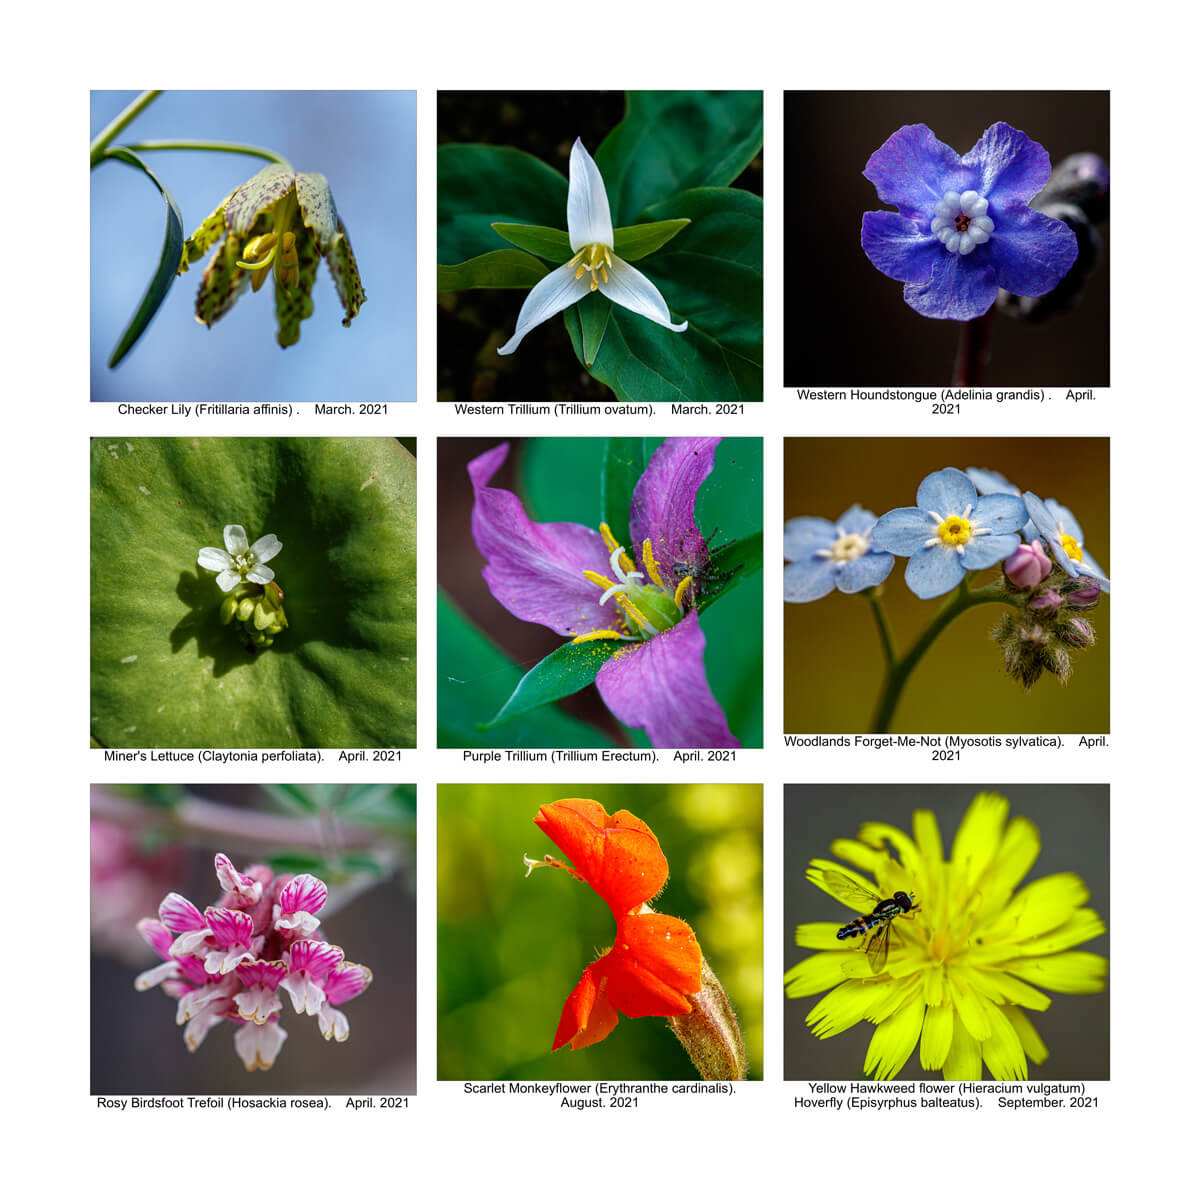 A grid of 9 squares show wildflowers found in 2021: Checker lily, Western trillium, Western houndstongue, miner’s lettuce/Indian lettuce, purple trillium, woodland’s forget-me-not, rosy birdsfoot trefoil, scarlet monkeyflower, and yellow hawkweed flower, by Ian Bornarth